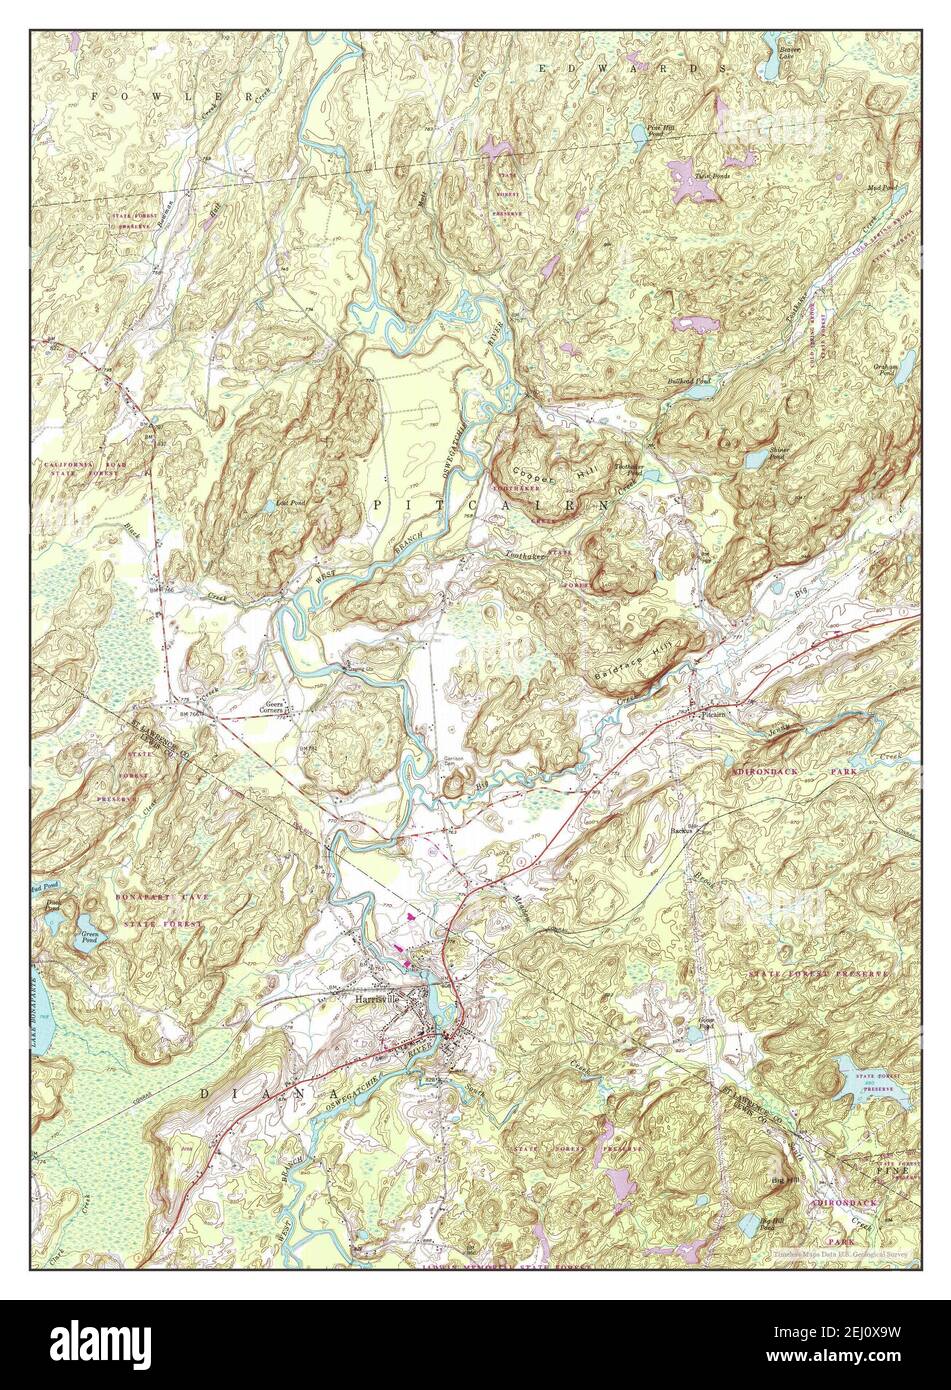 Harrisville, New York, map 1951, 1:24000, United States of America by Timeless Maps, data U.S. Geological Survey Stock Photo